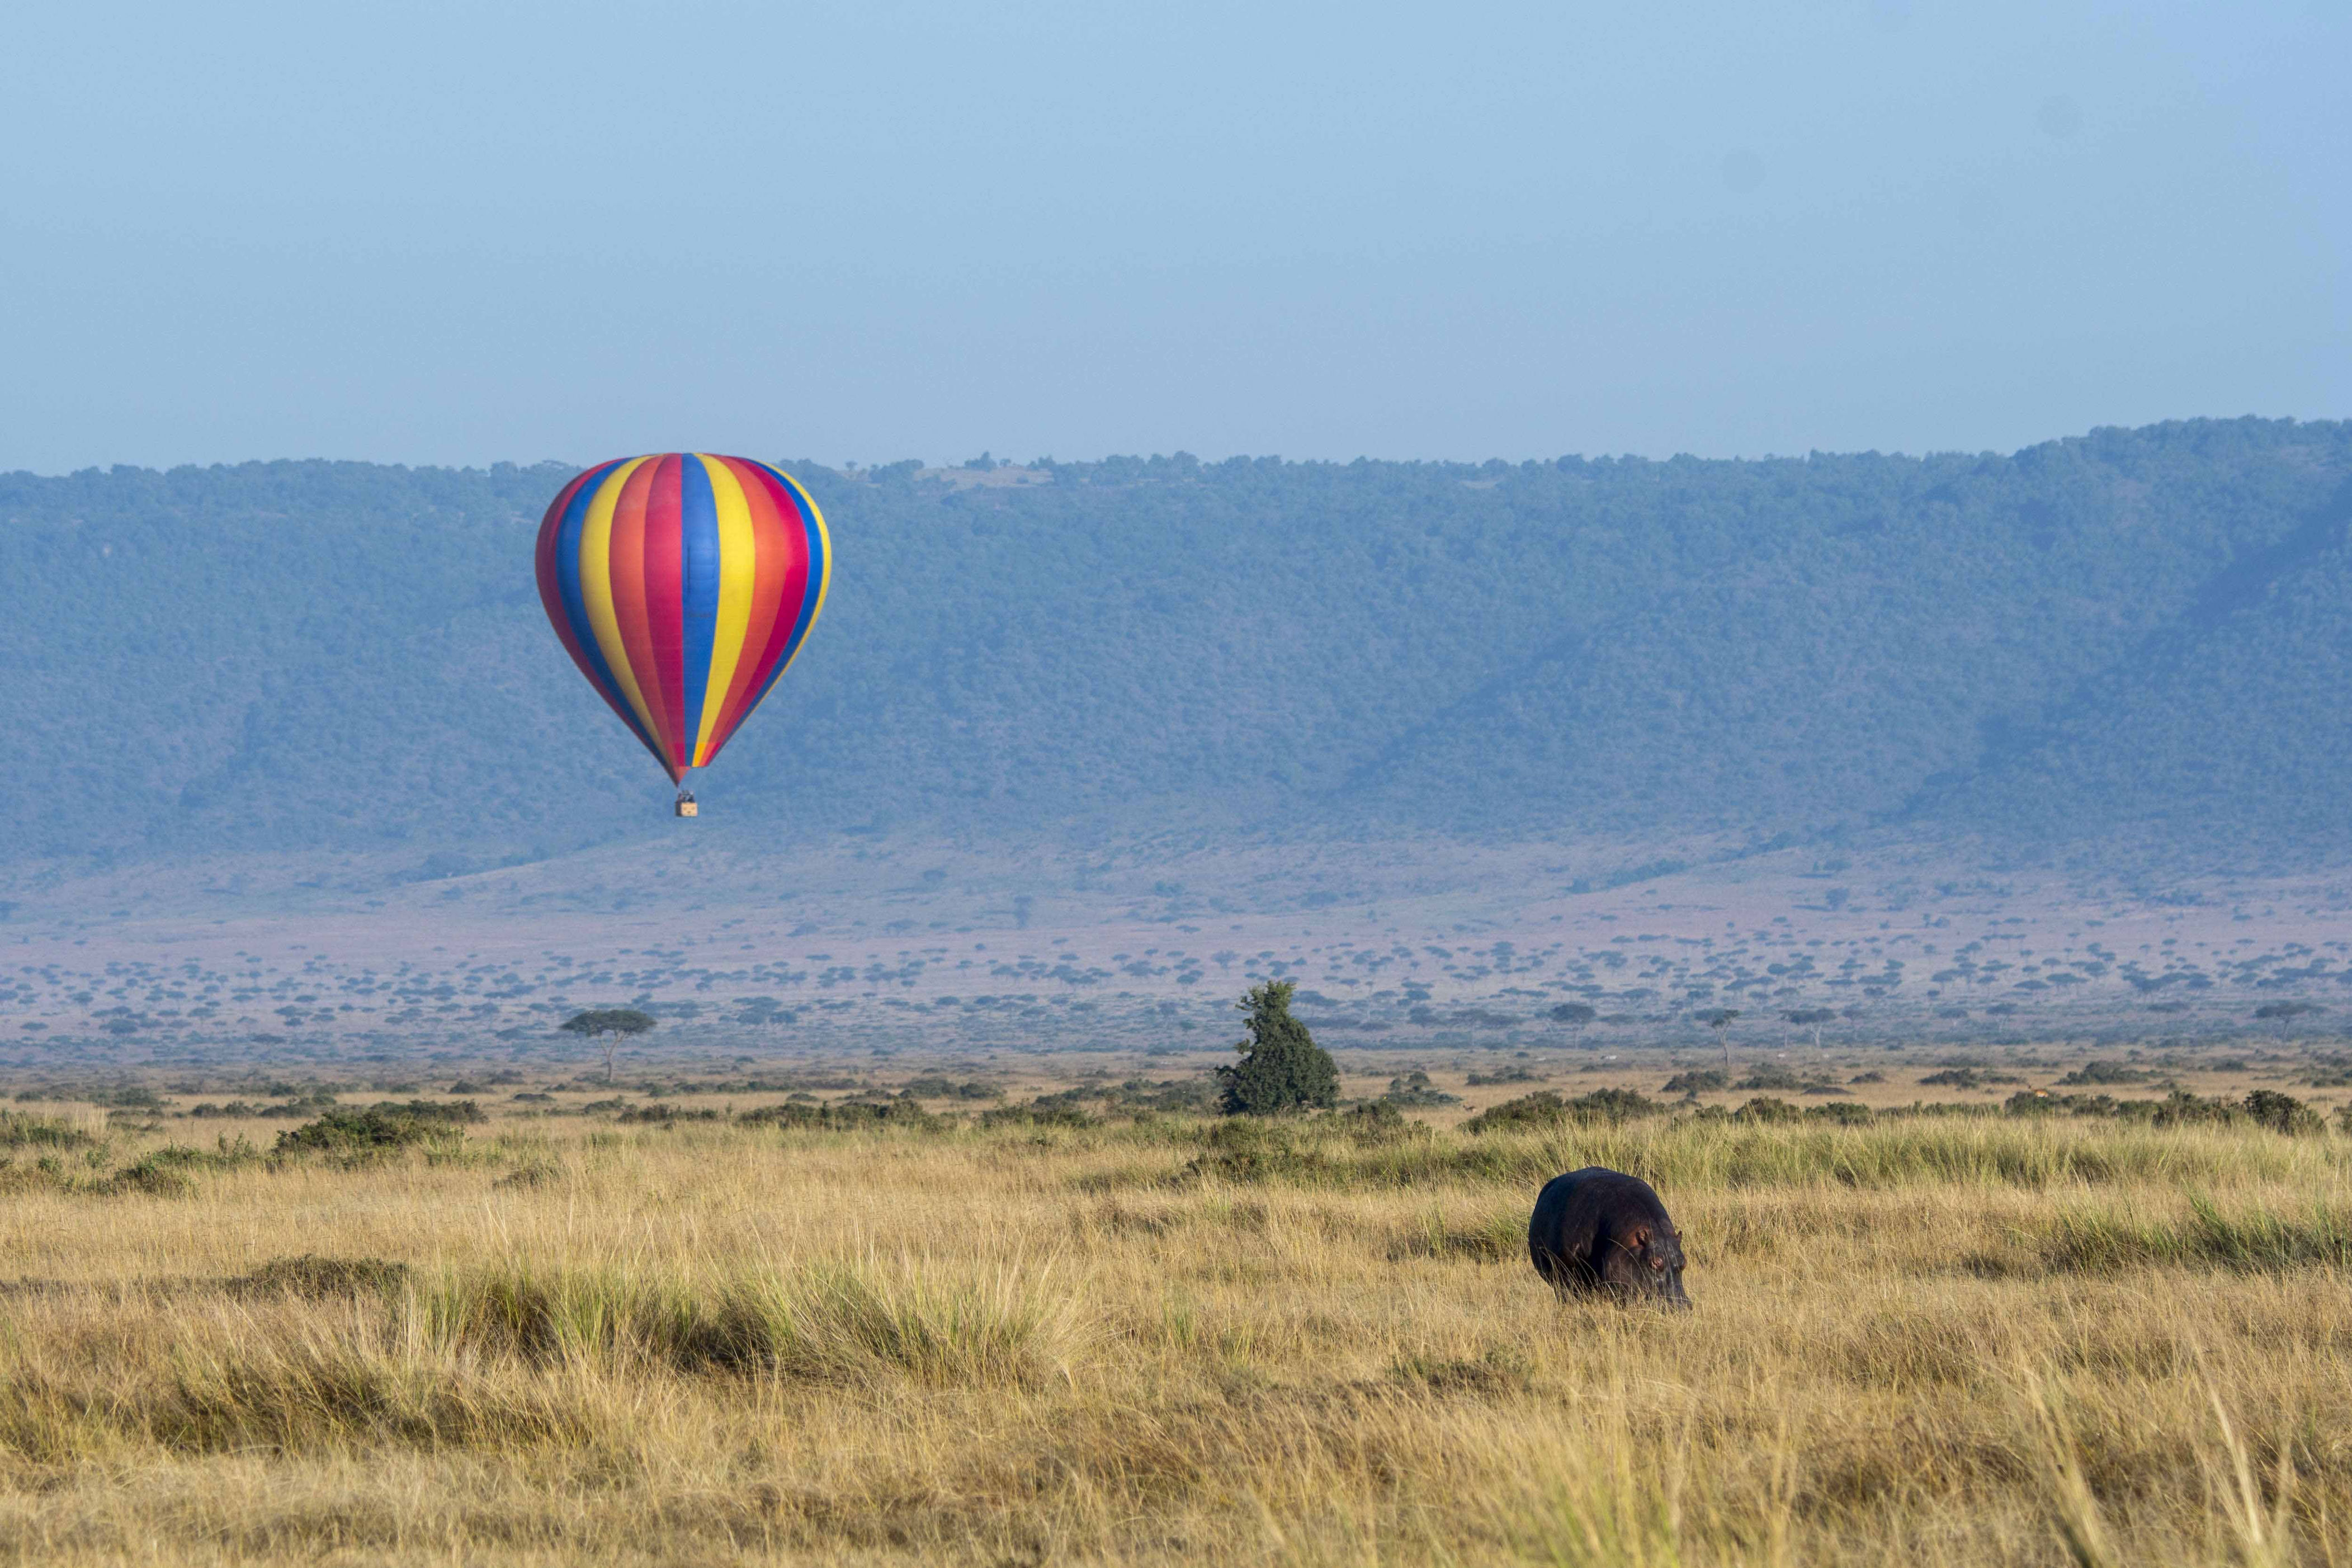 for indians on the great masai mara safari, 150% hike in fees is no worry